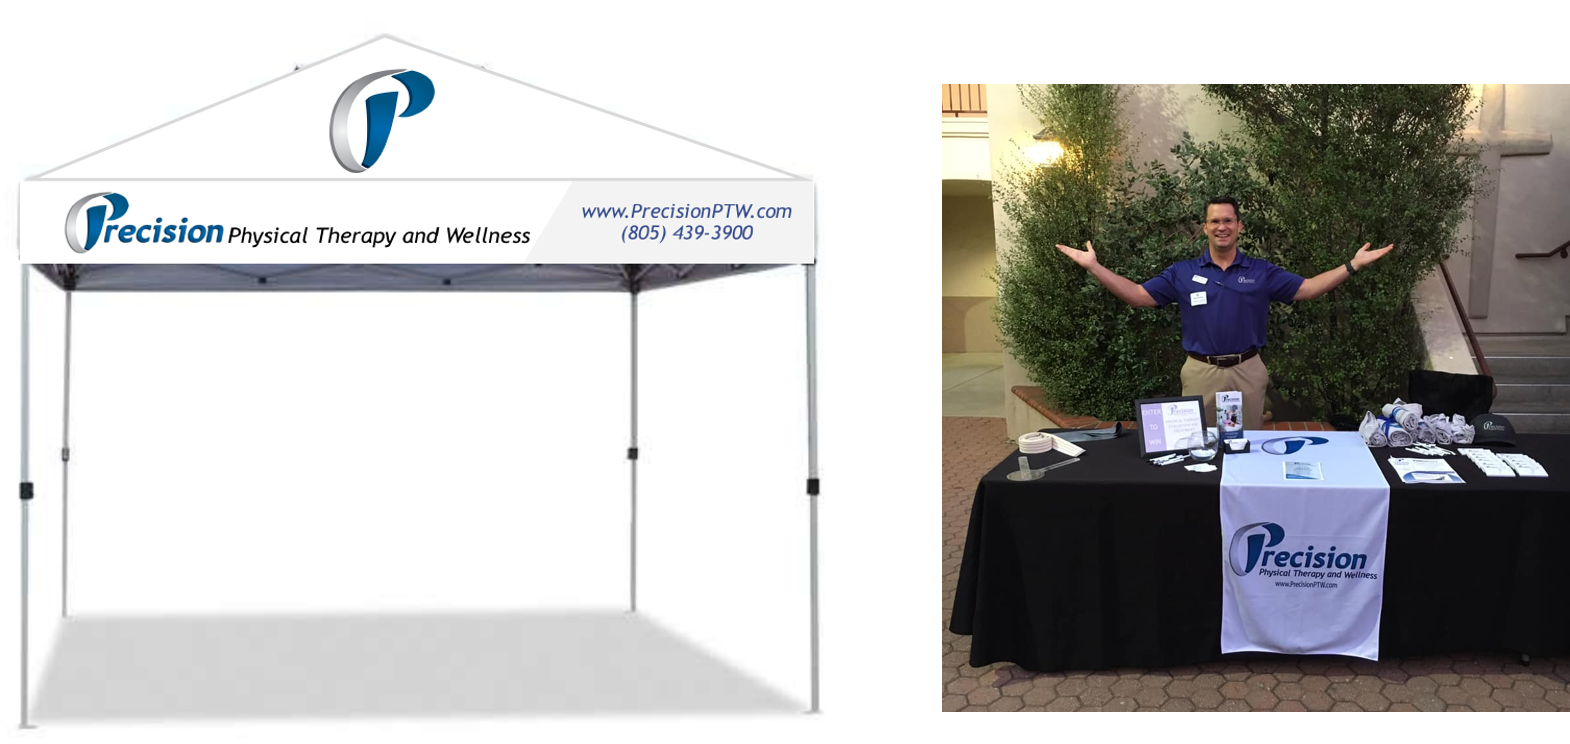 Nicolette A Munoz Consulting - Precision Physical Therapy SLO - Trade Show